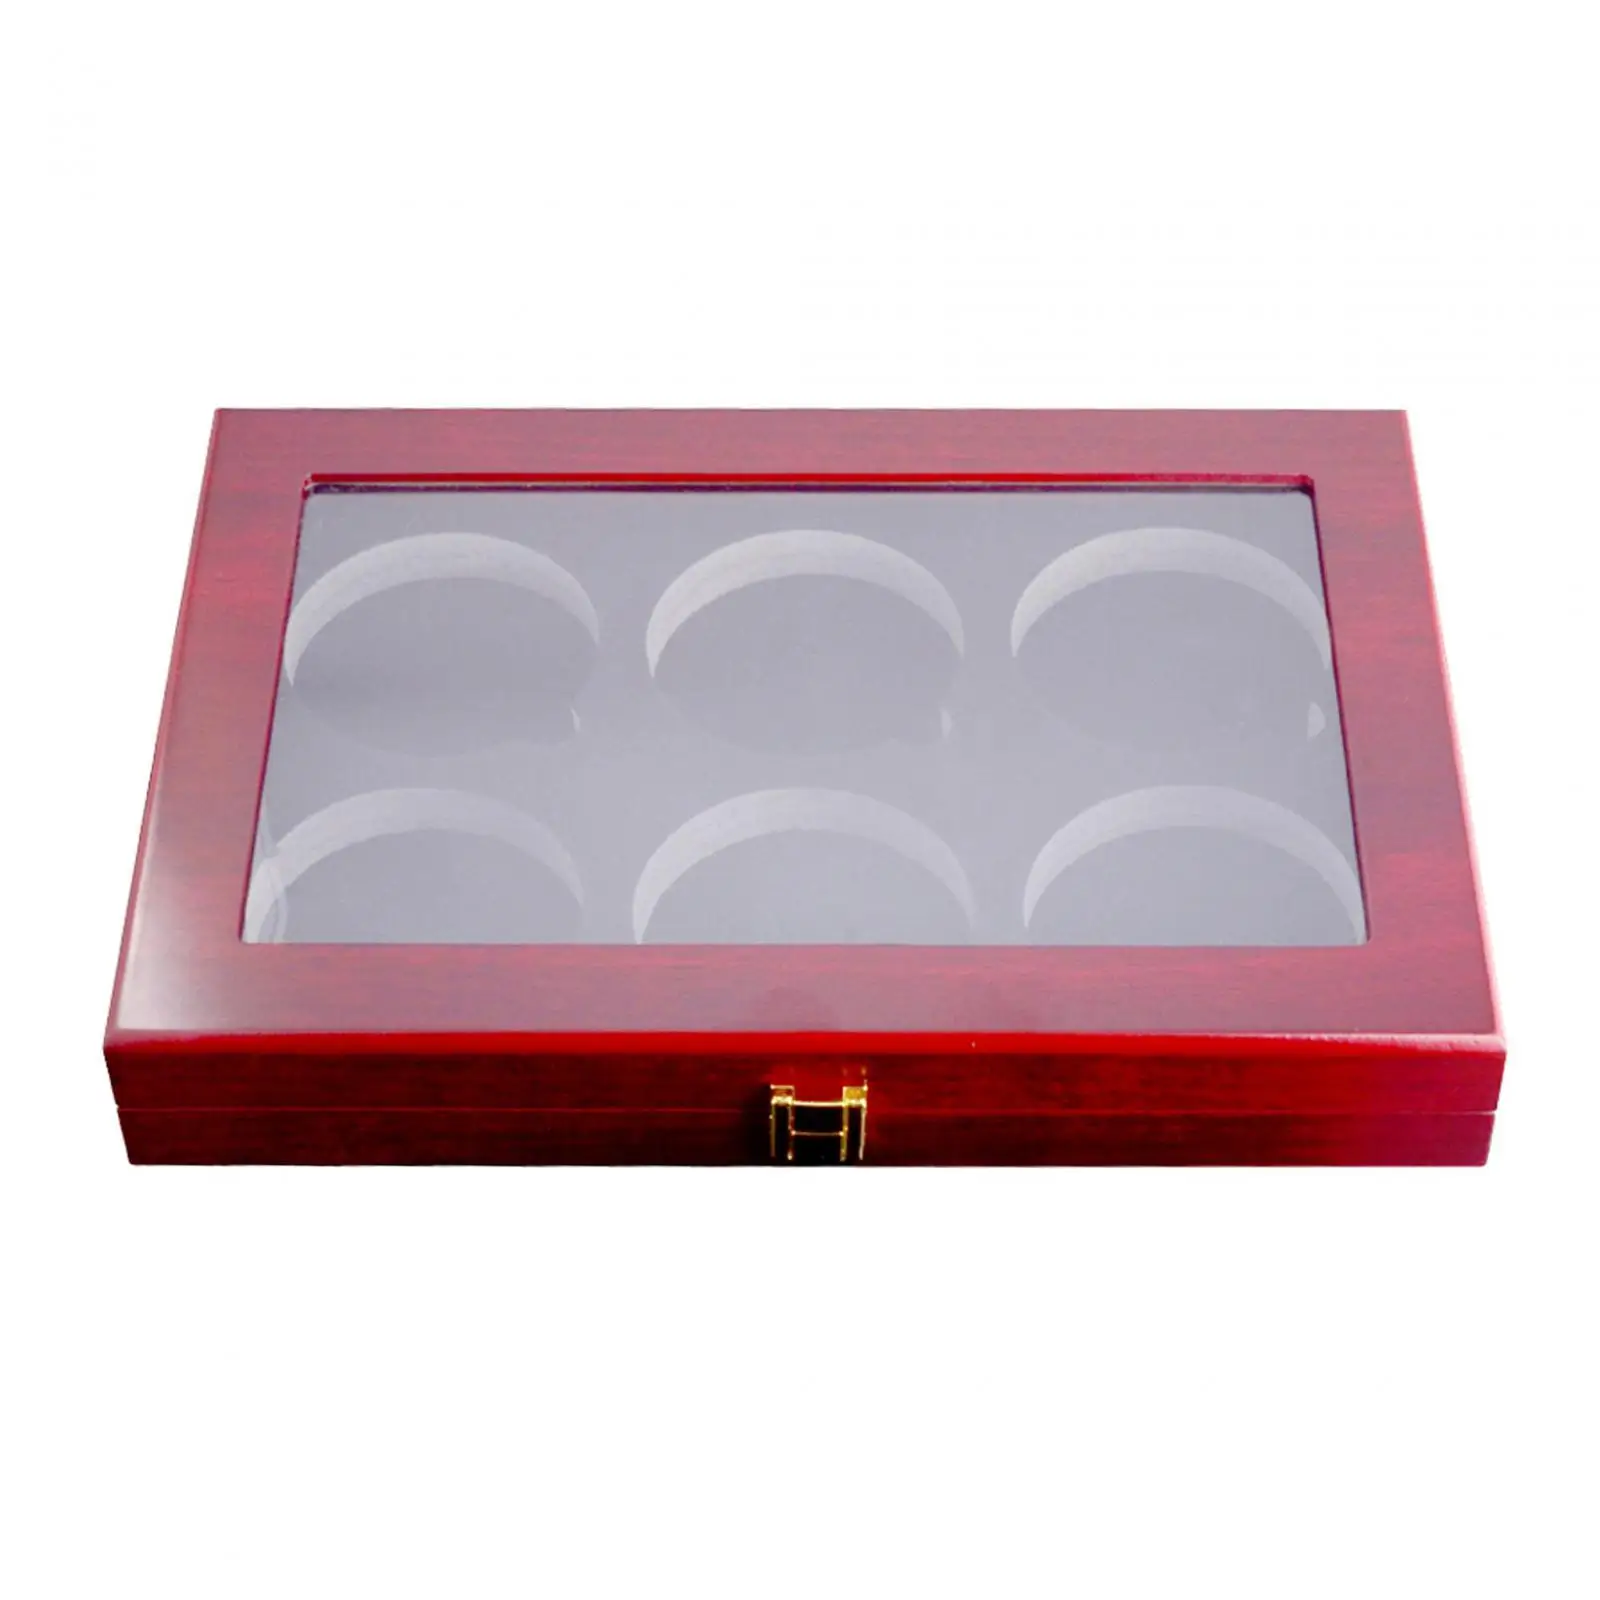 6 Holes Hockey Puck Display Case Wooden Easy to Use with Lock with Protection Door Cabinet Holder Rack Shadow Box Puck Holder